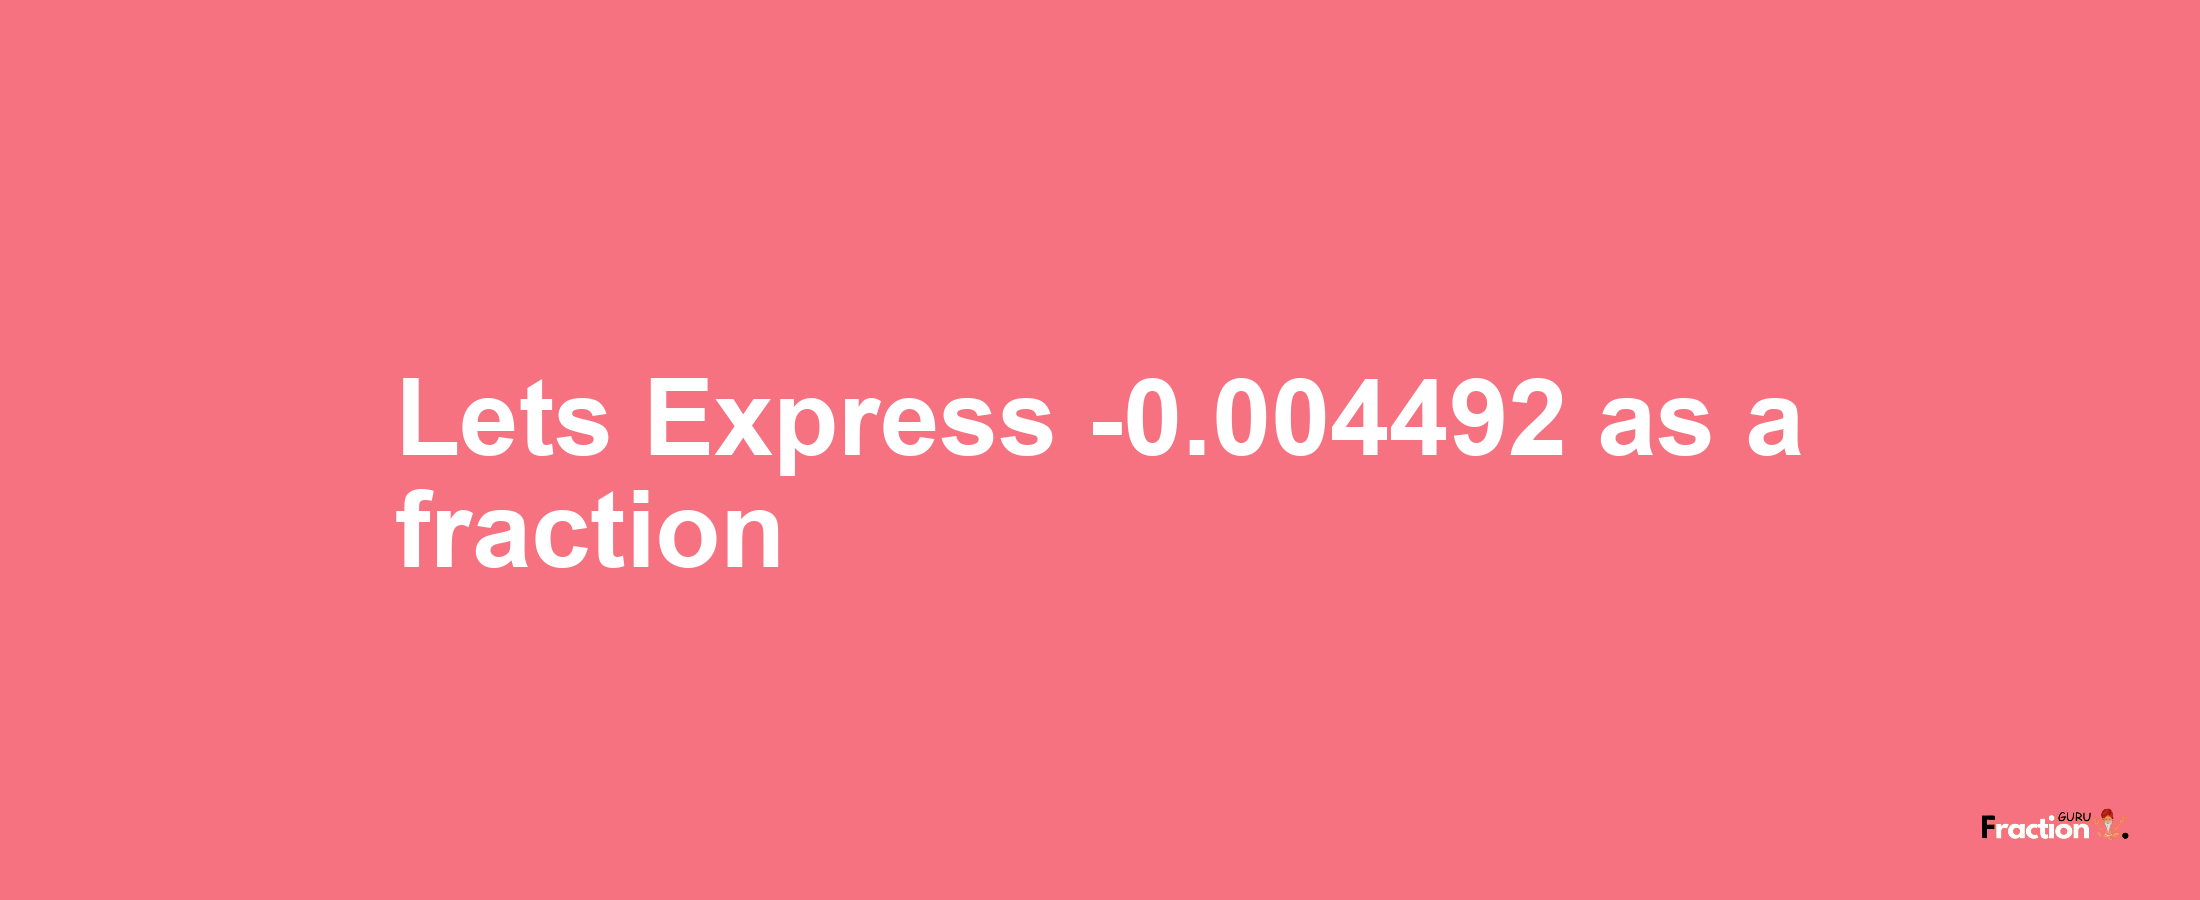 Lets Express -0.004492 as afraction